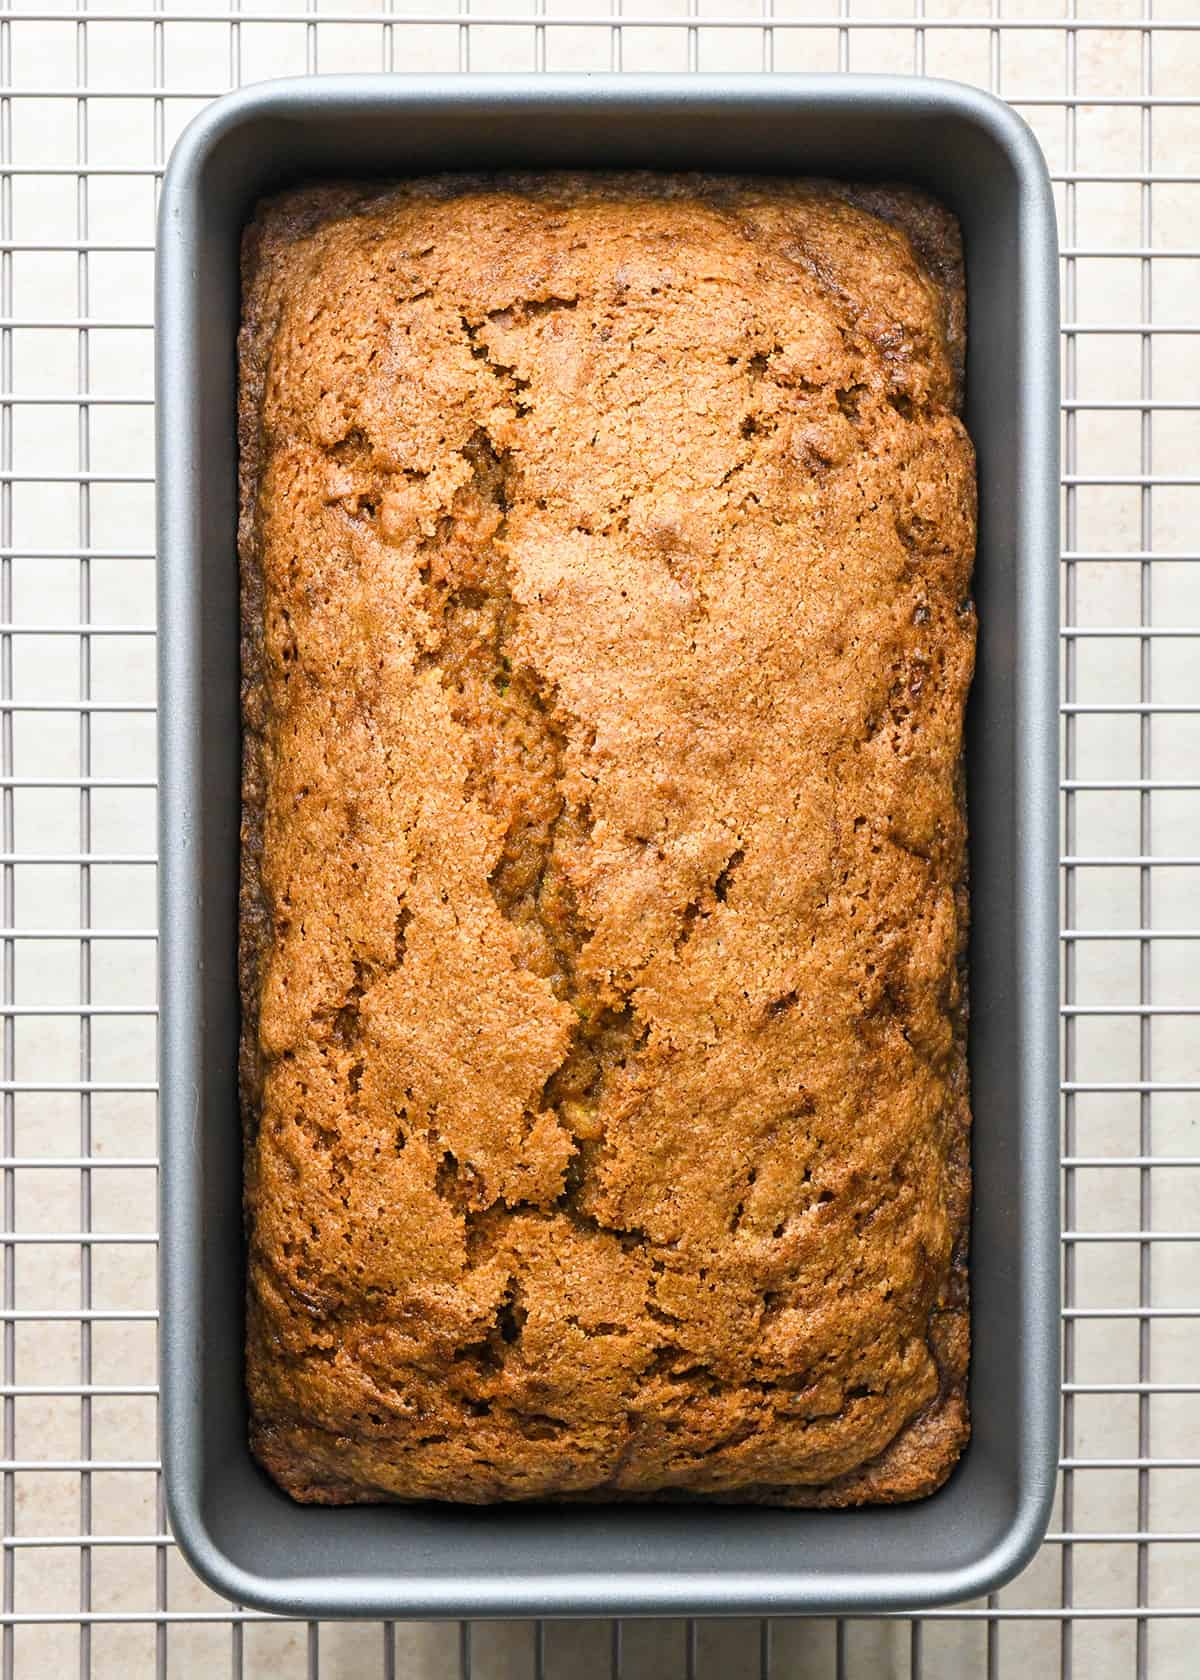 baked Zucchini Bread in a loaf pan on a wire cooling rack